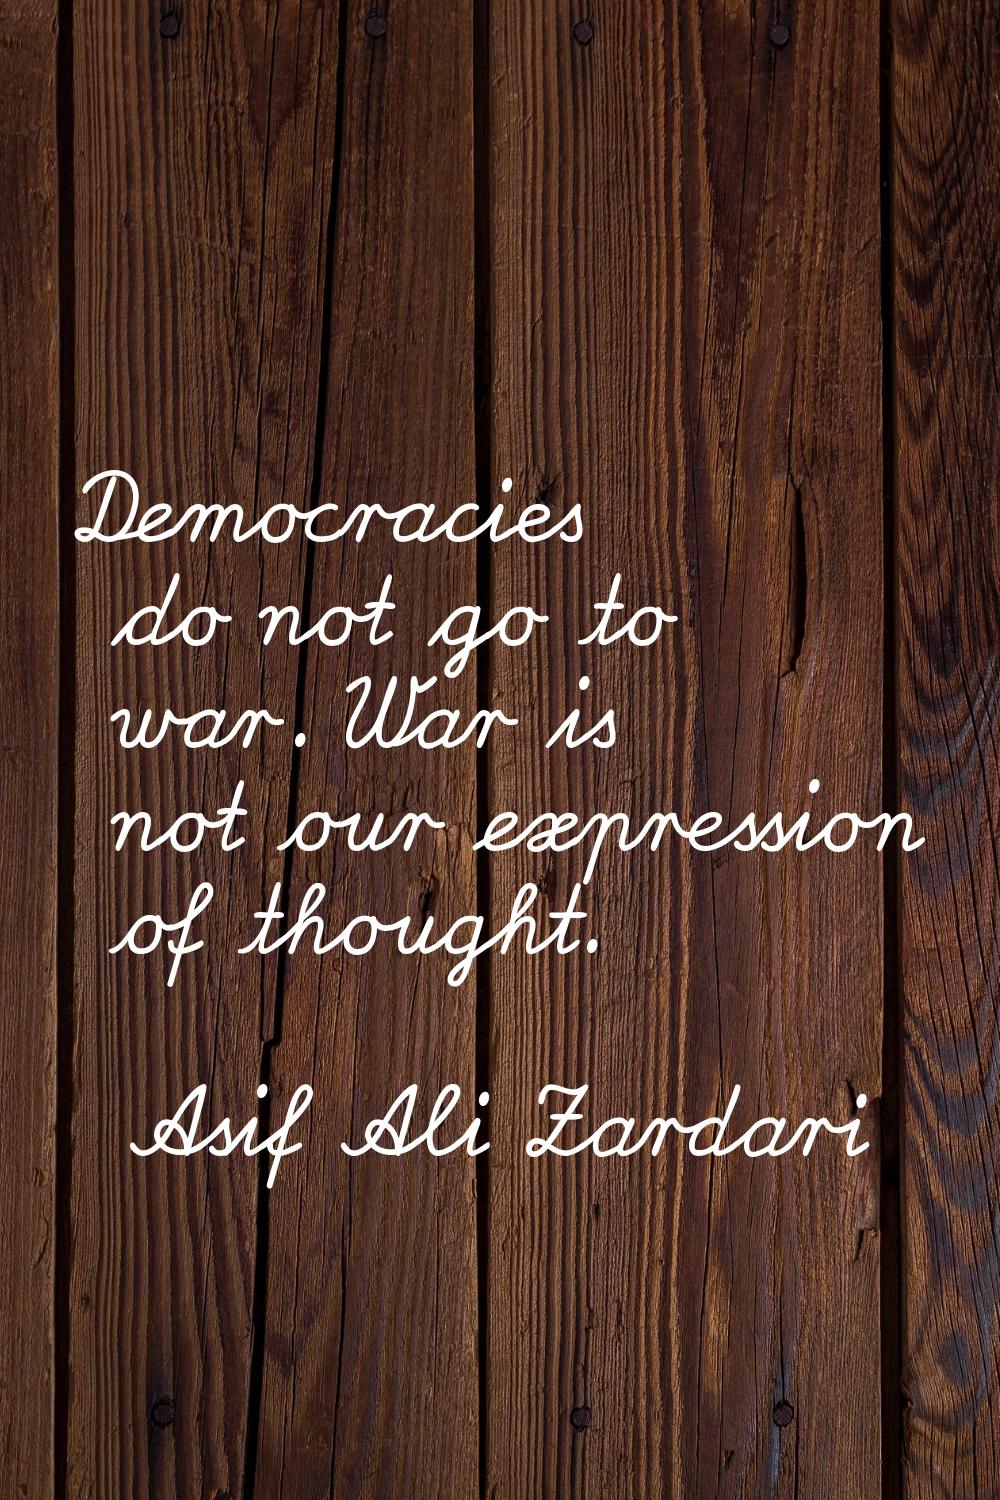 Democracies do not go to war. War is not our expression of thought.